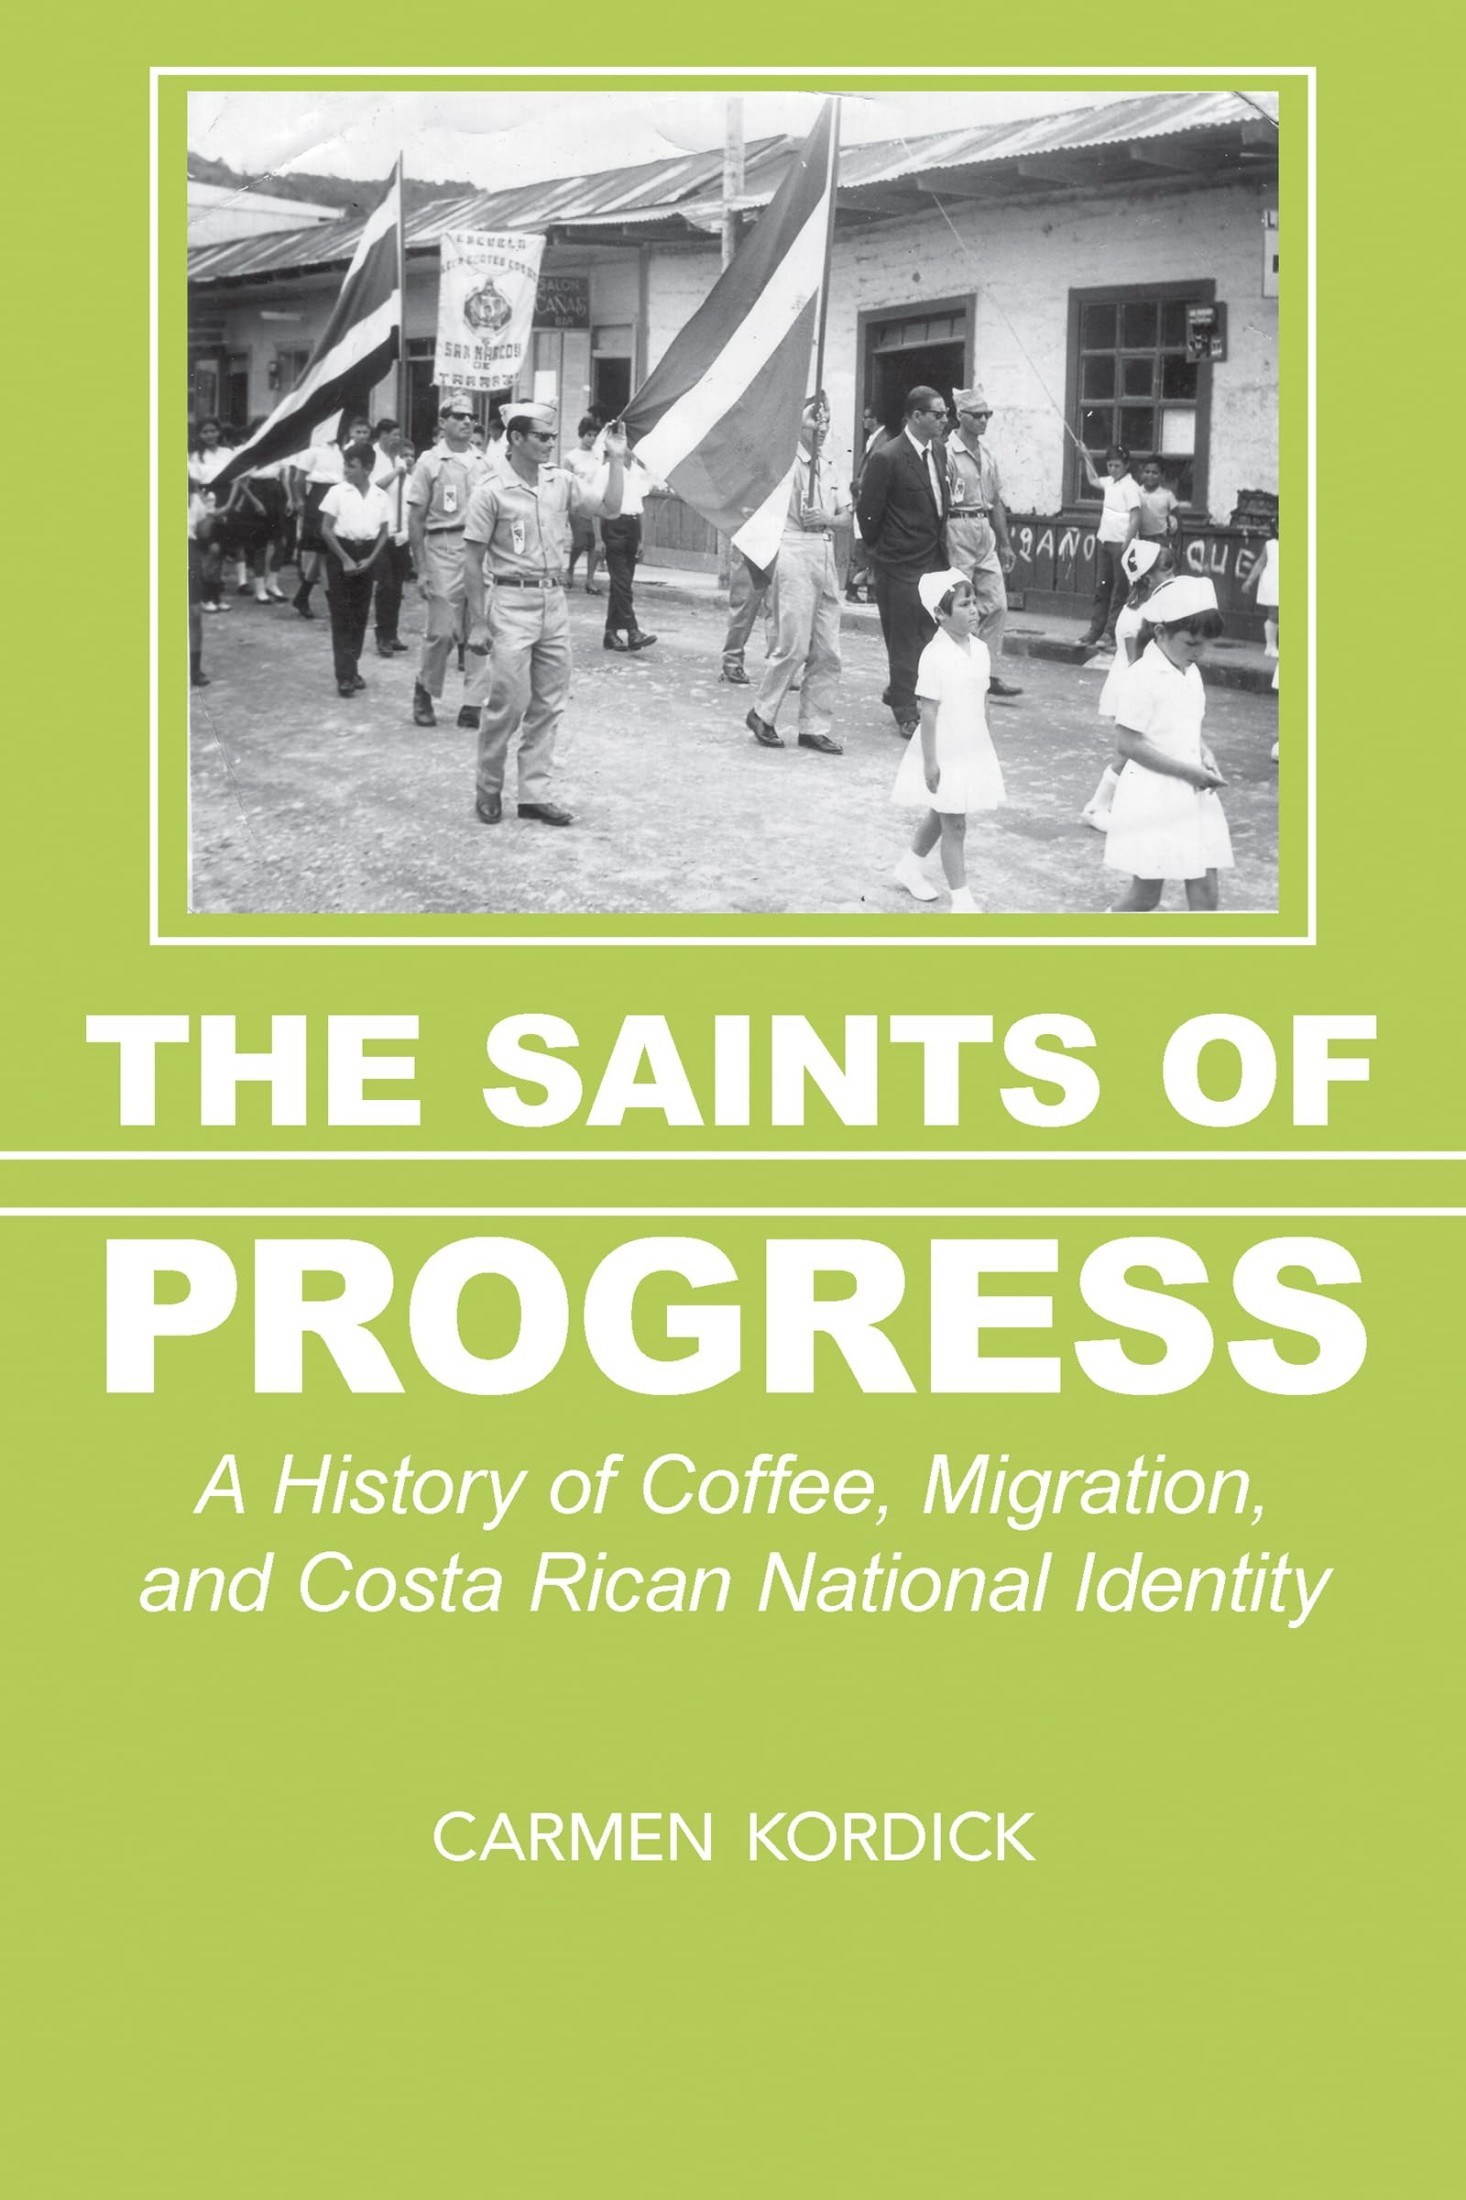 The Saints of Progress: A History of Coffee, Migration, and Costa Rican National Identity